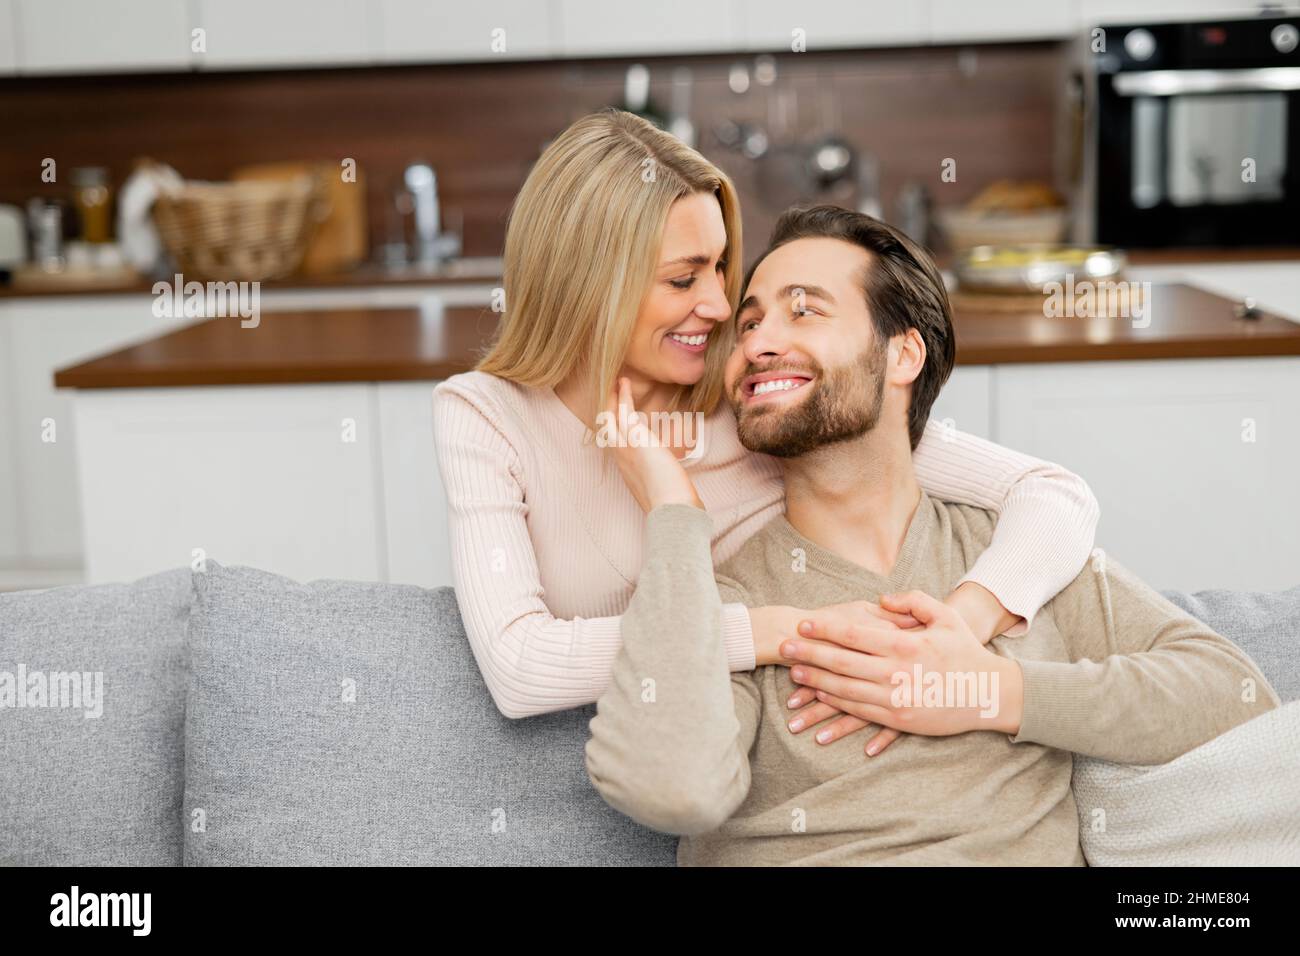 Happy beautiful wife hugging from the back her husband sitting on the couch, they looking at each other and smile. Love and support concept Stock Photo